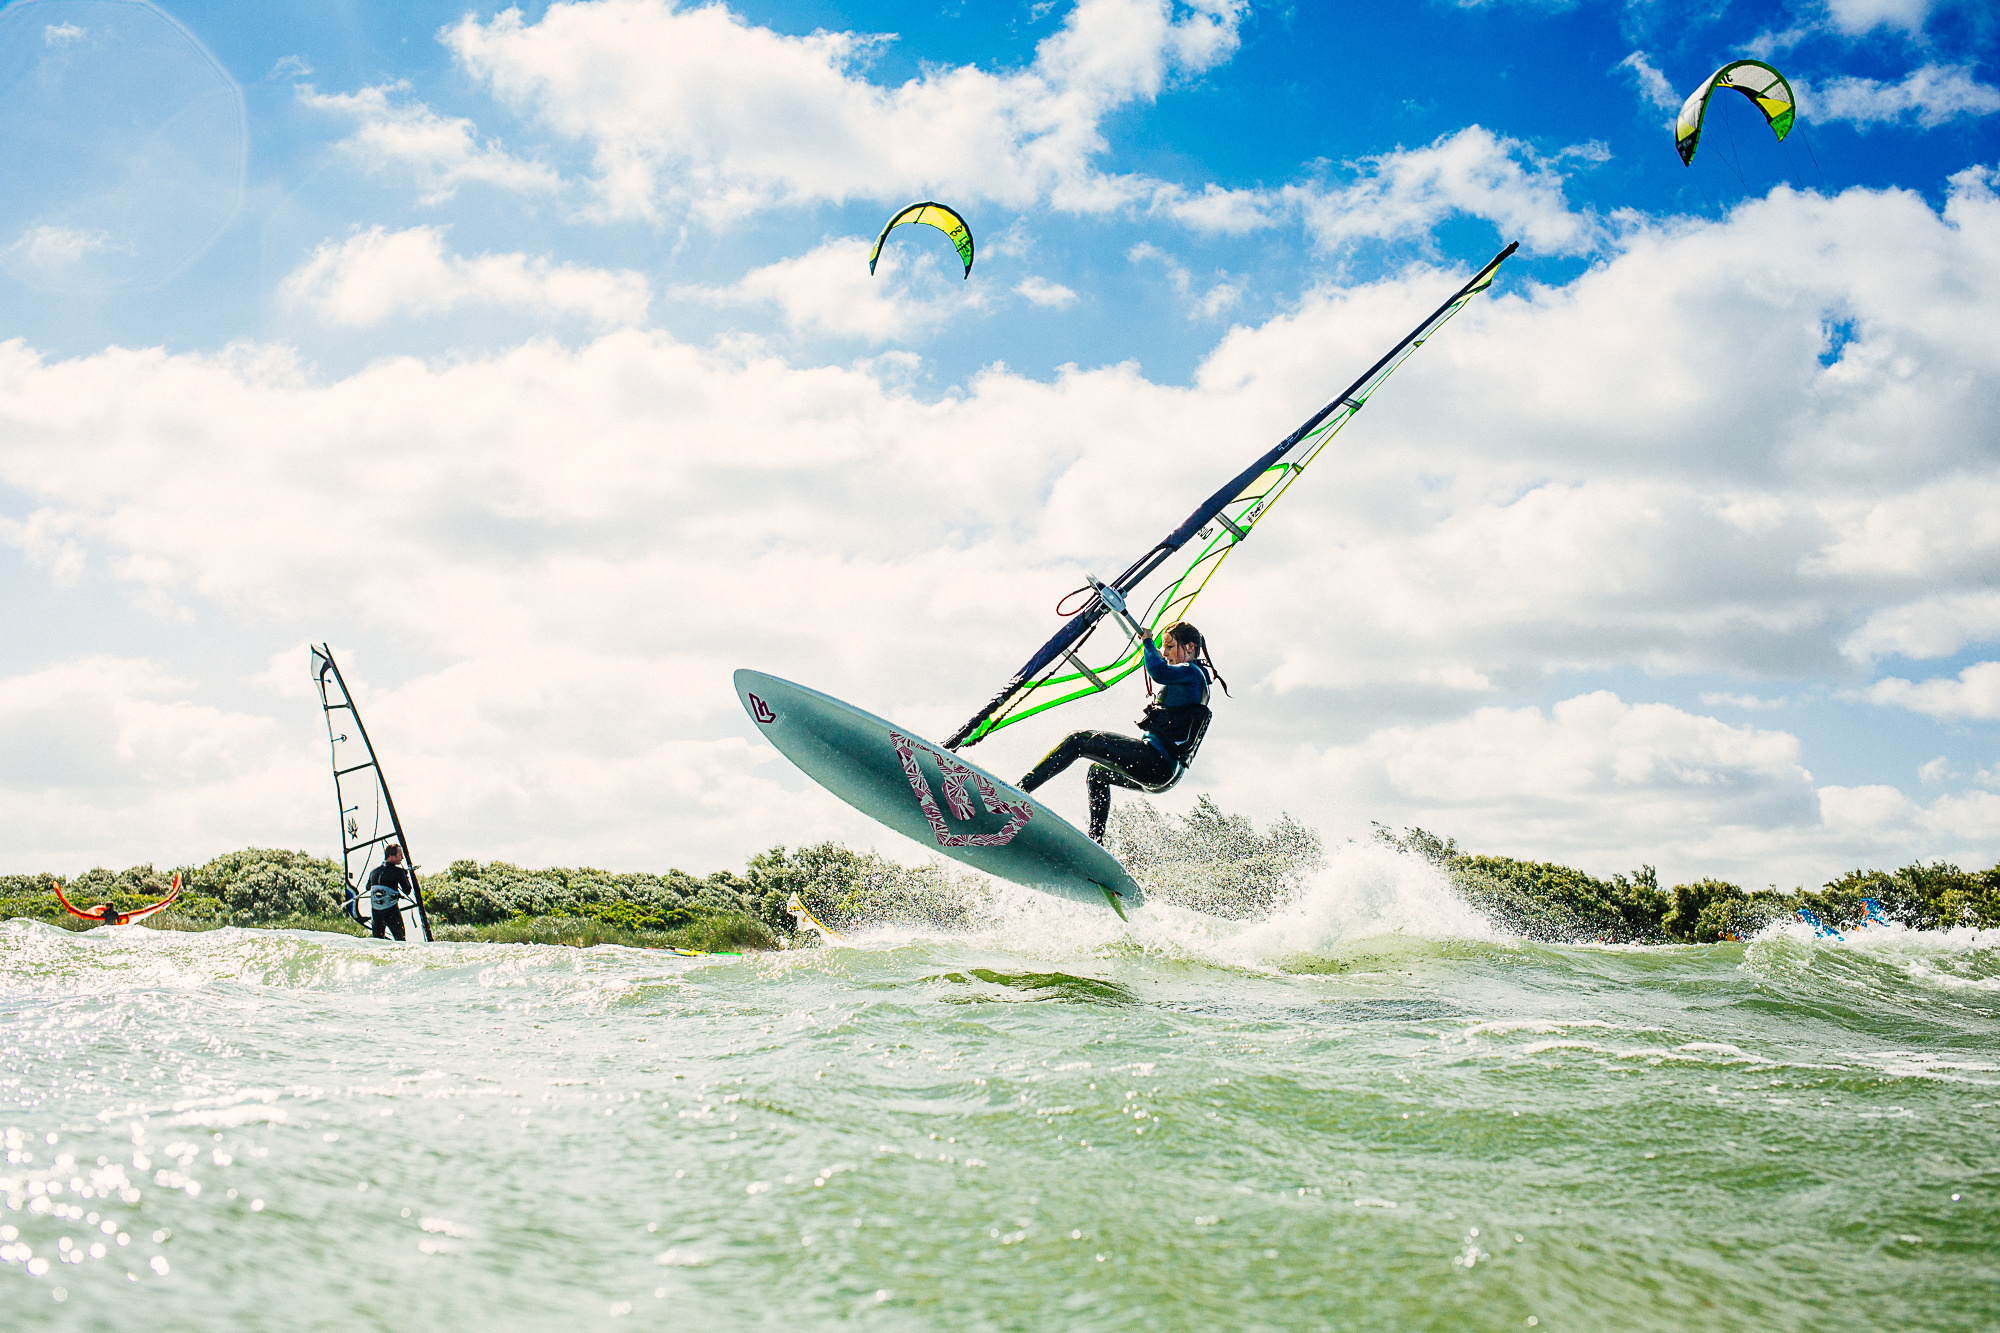 Windsurfing: Windsurf Trial Course, Windsurf Freestyle Academy, Professional Training And Ultimate Surfing Fun. 2000x1340 HD Wallpaper.